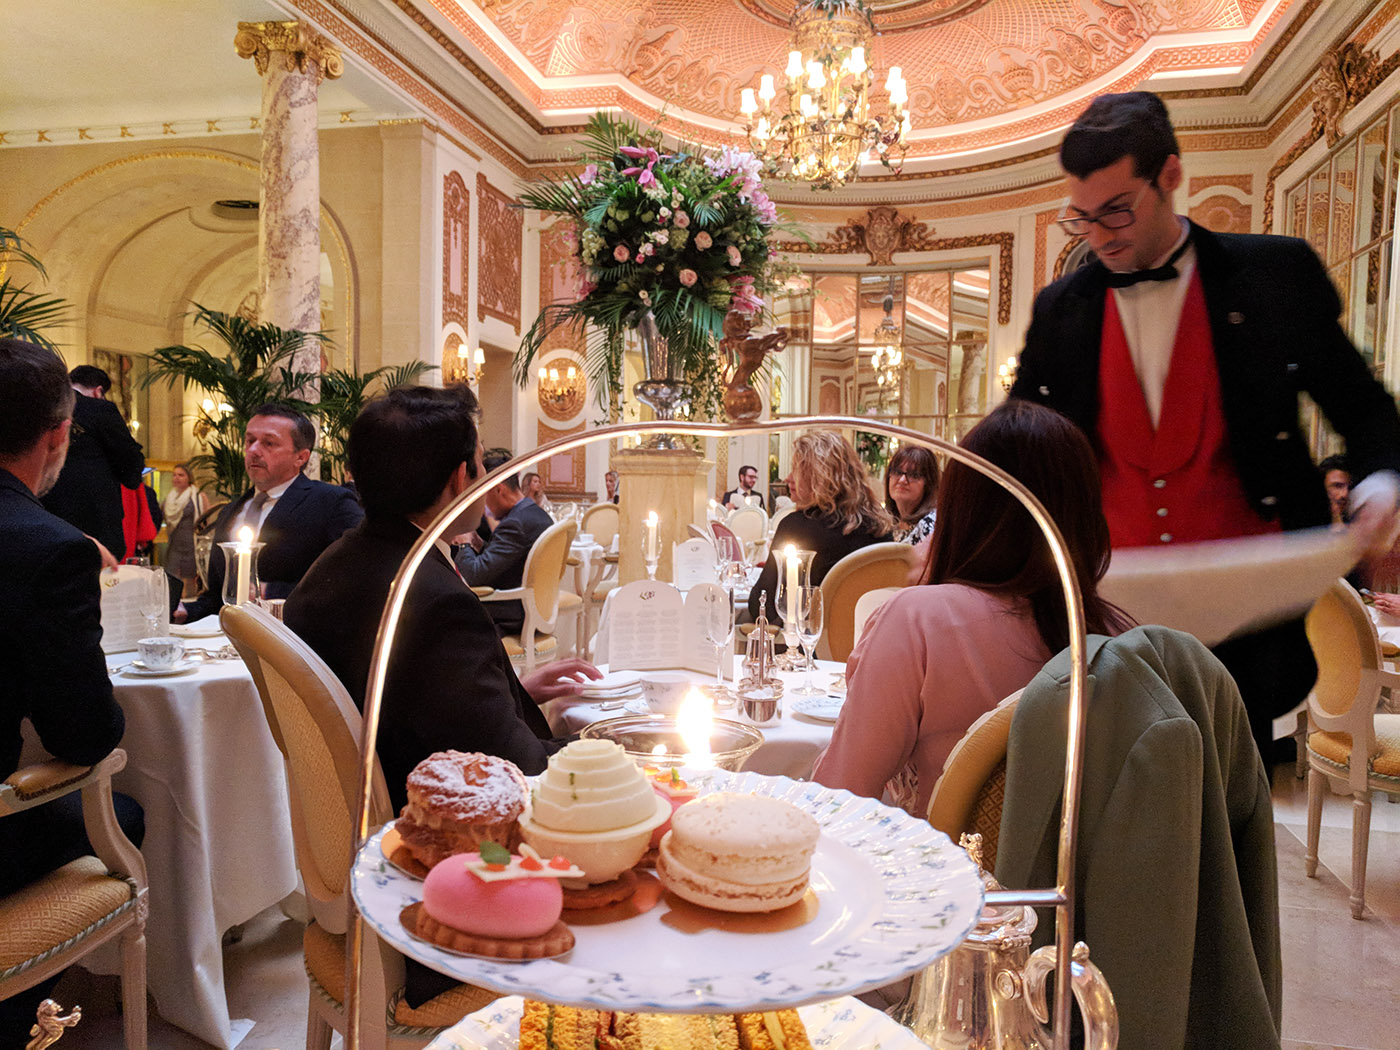 my full review of afternoon tea at The Ritz